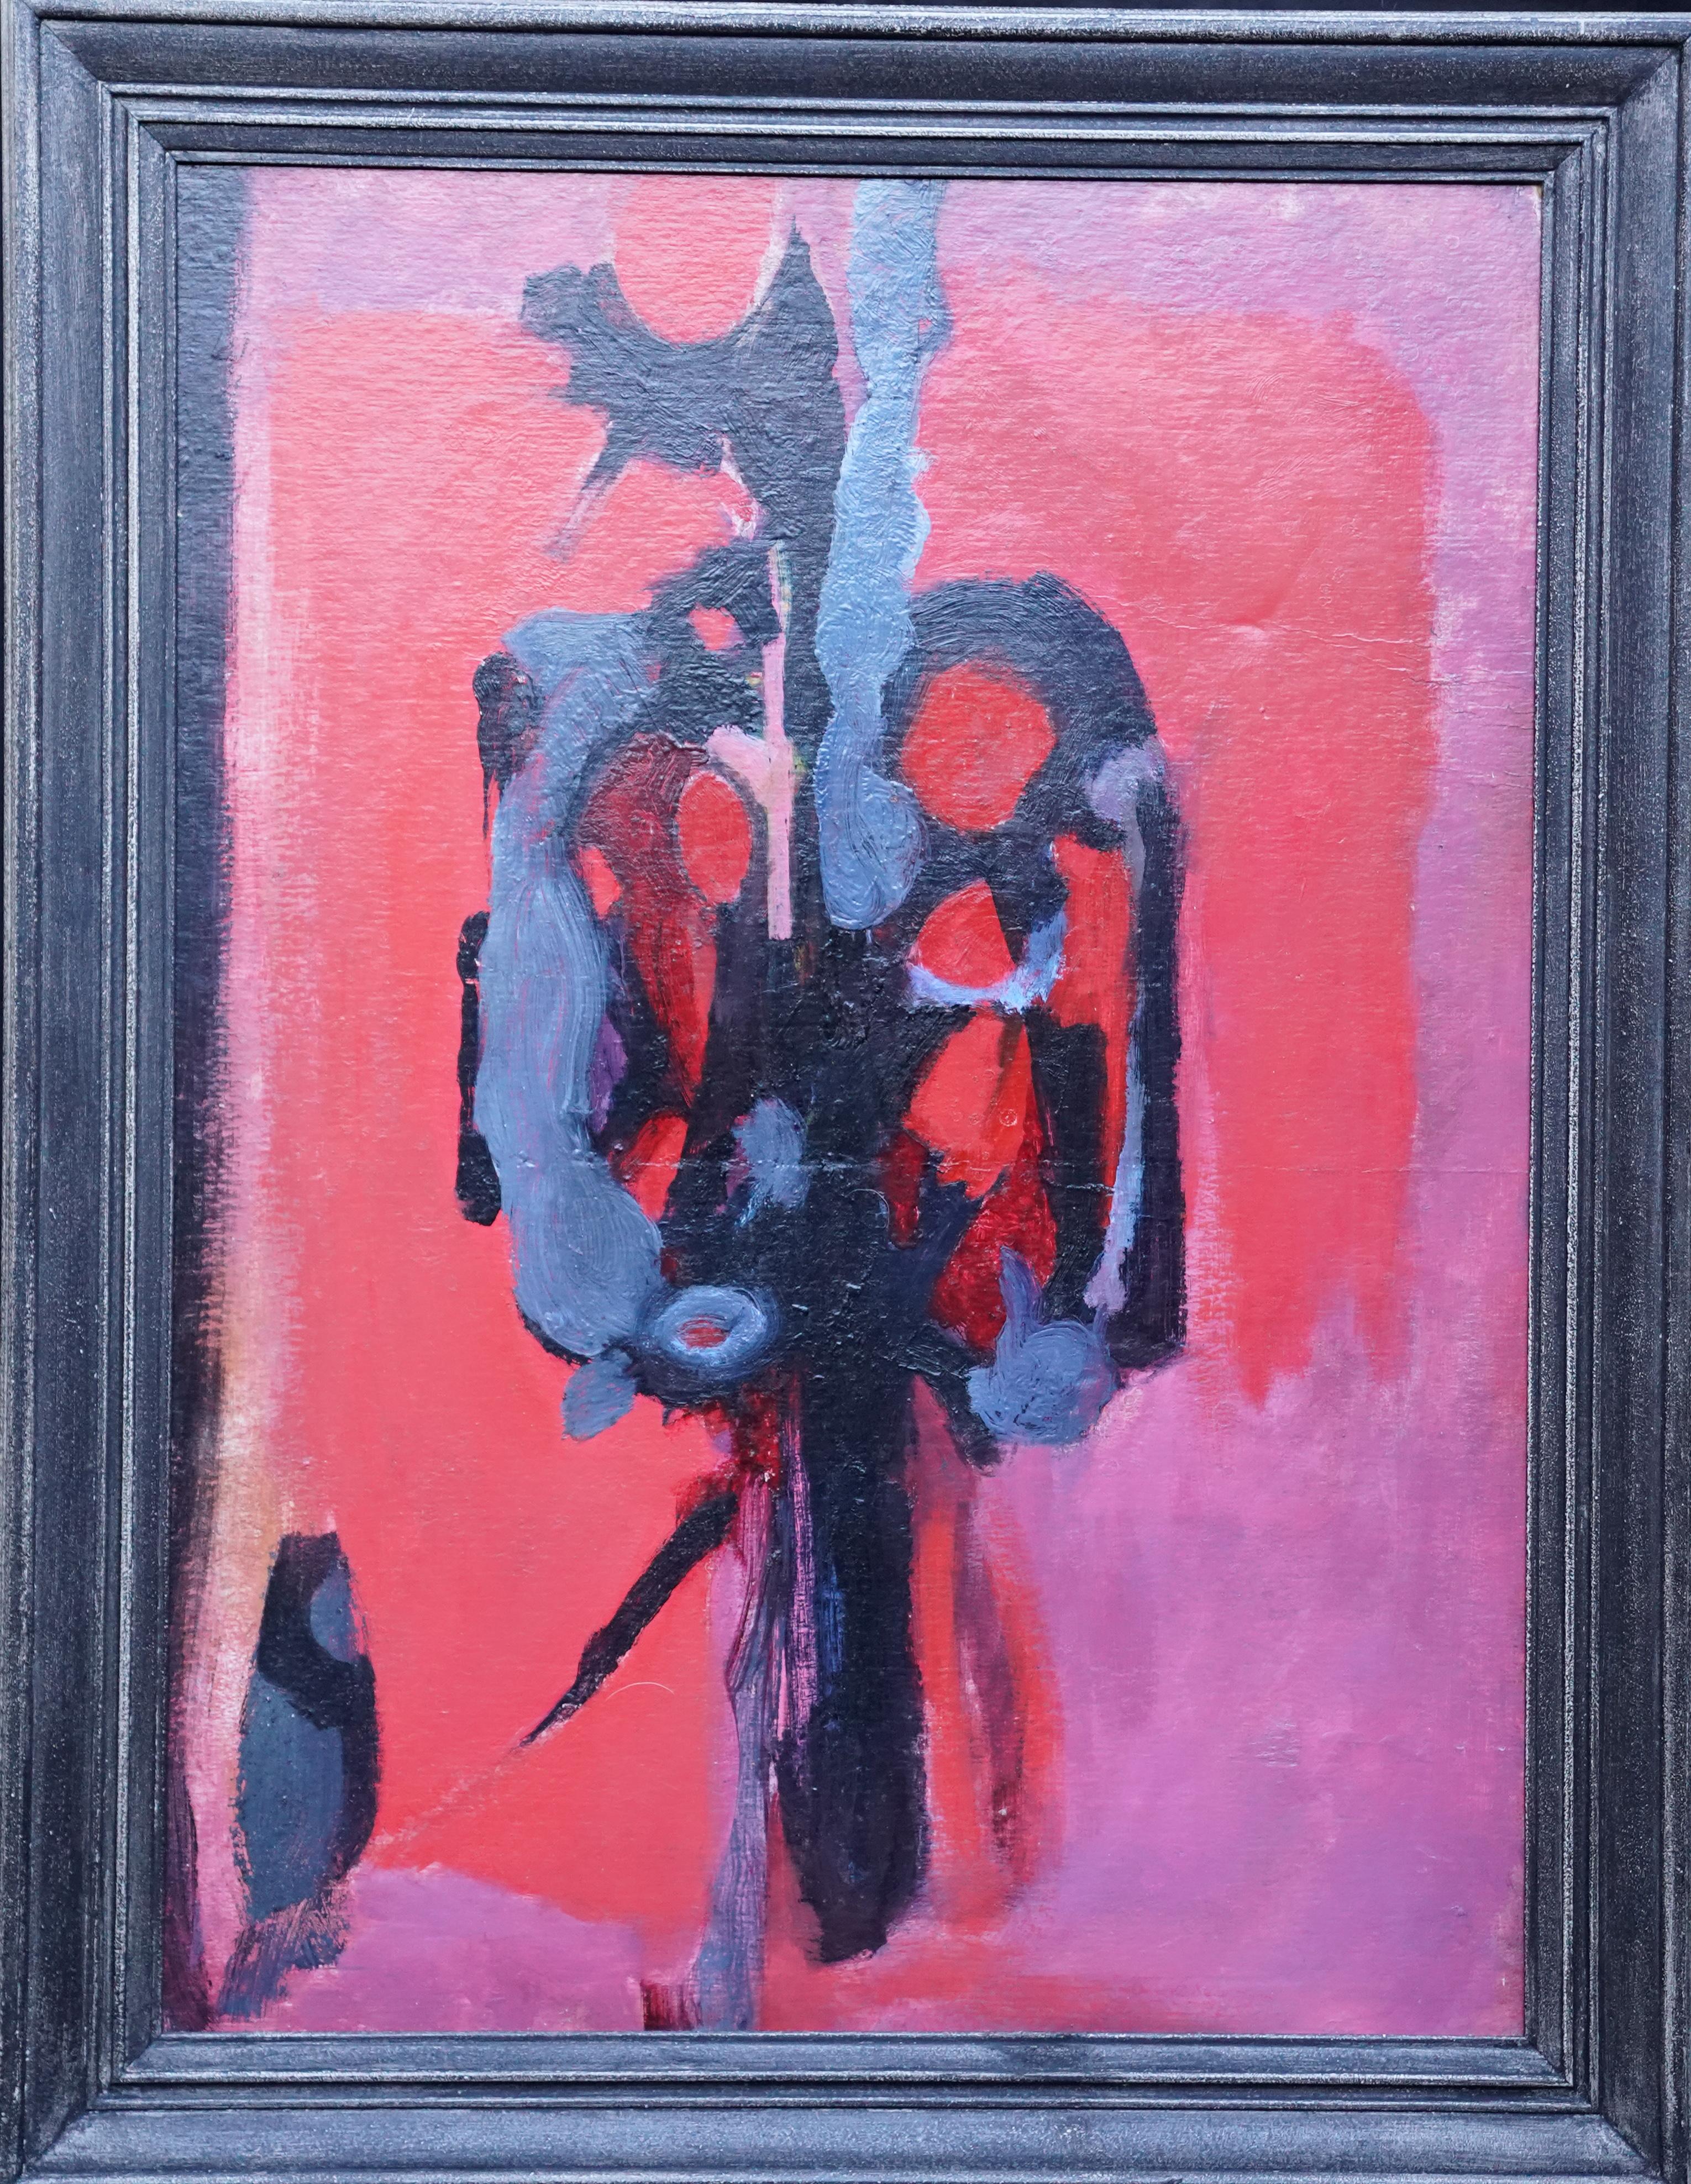 Red Abstract, London 1955 - British Abstract Expressionist art oil painting